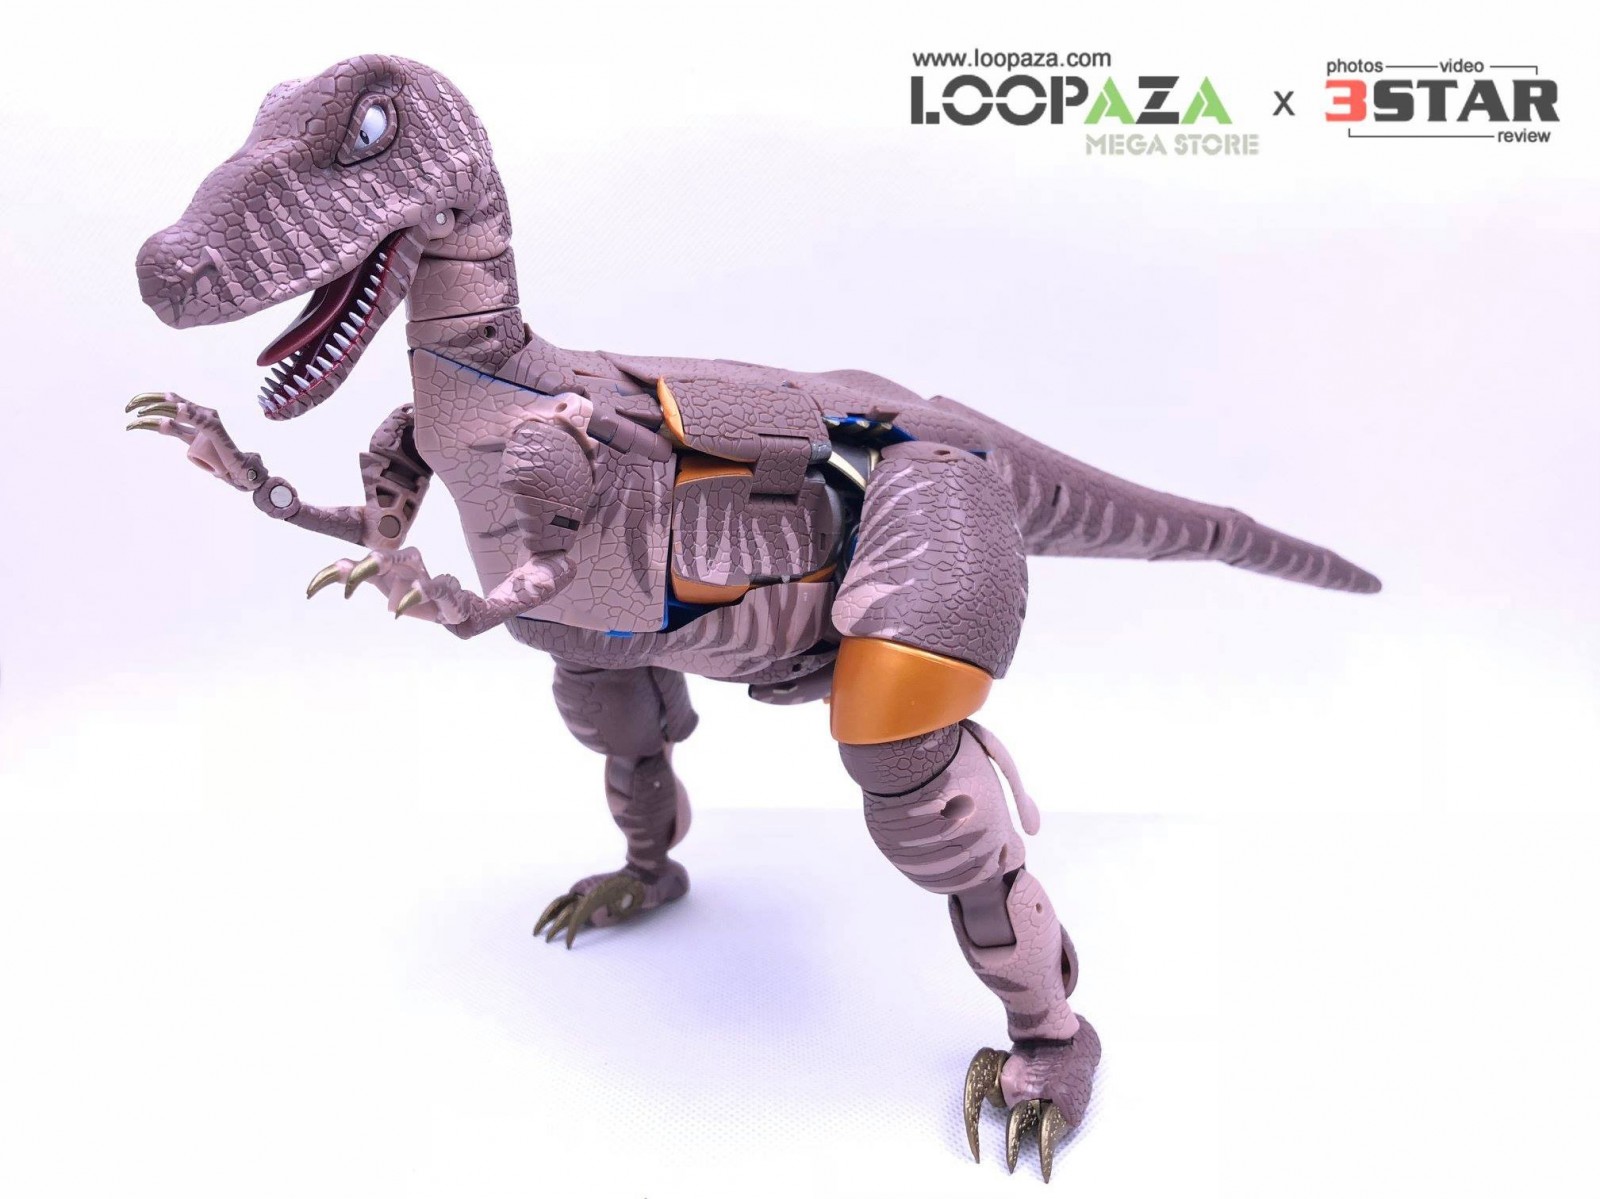 Transformers News: In-Hand Images of Takara Tomy Transformers Masterpiece MP-41 Dinobot